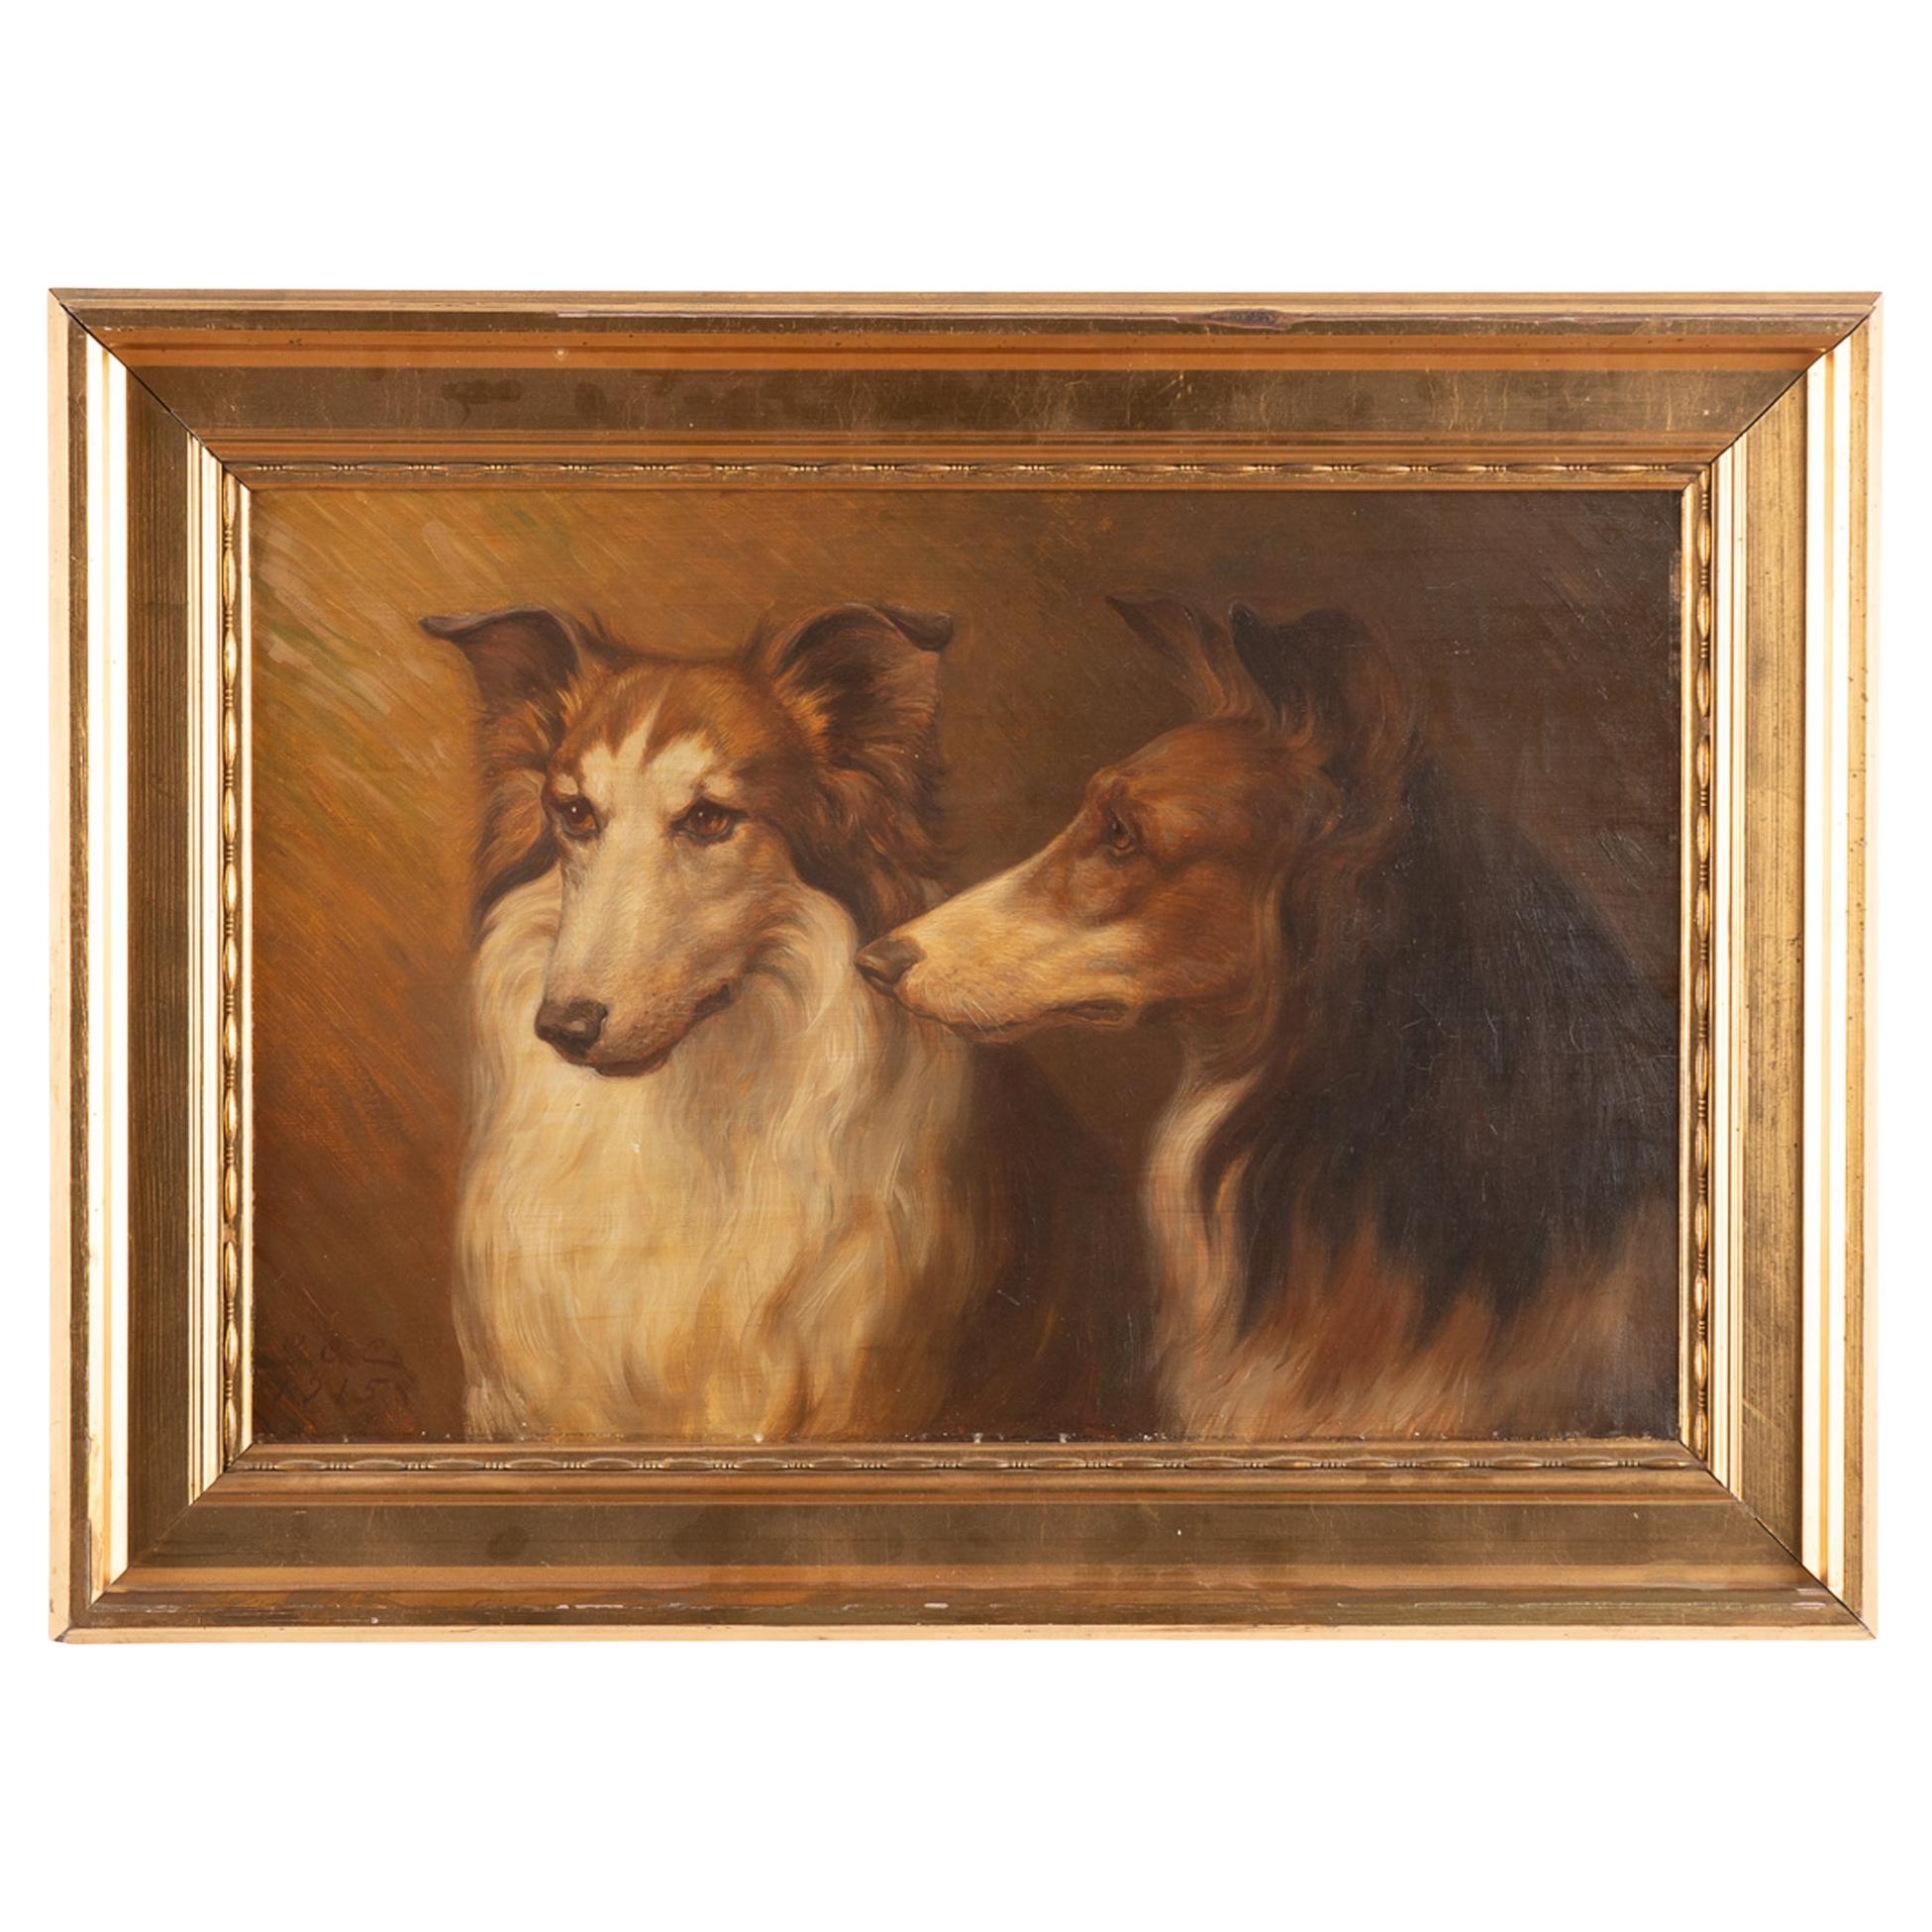 Original Oil on Canvas Painting of Two Collies by G.A. Clemens Signed Dated 1915 For Sale